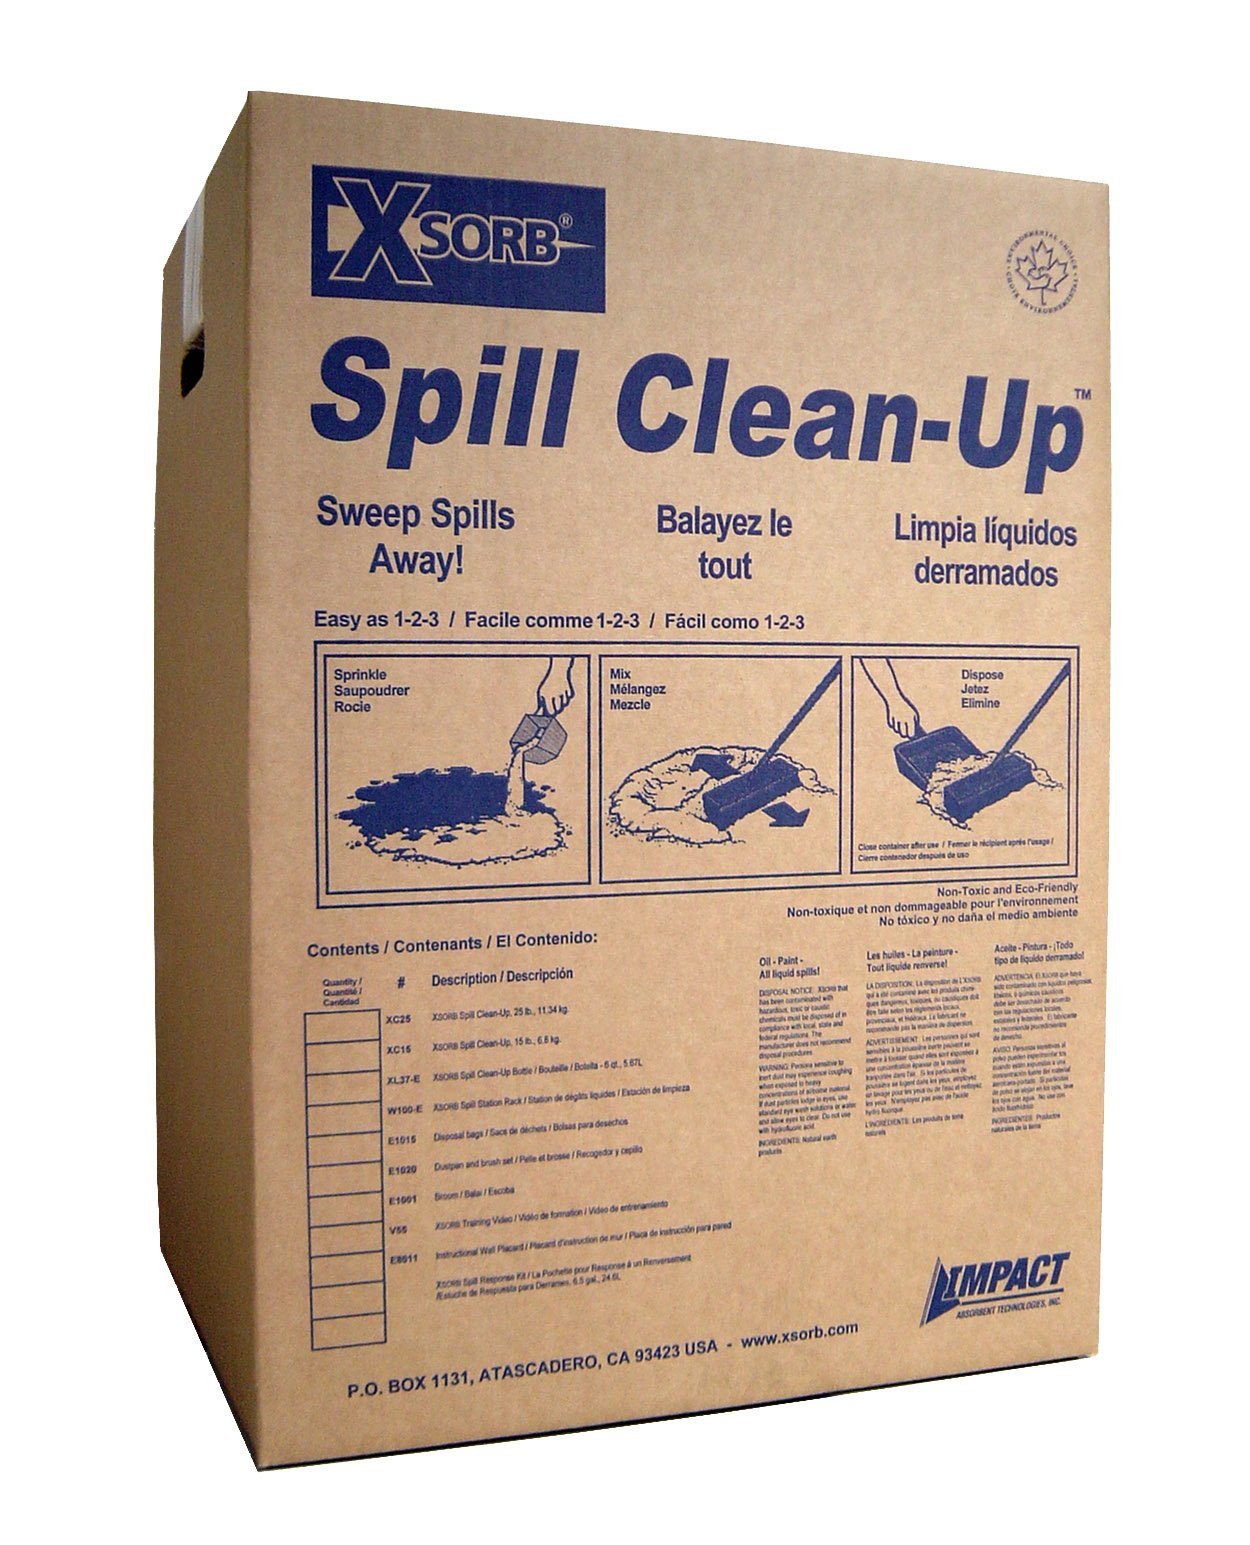 XSORB Universal Spill Clean-Up Box 25 lb. - 1 BOX-eSafety Supplies, Inc